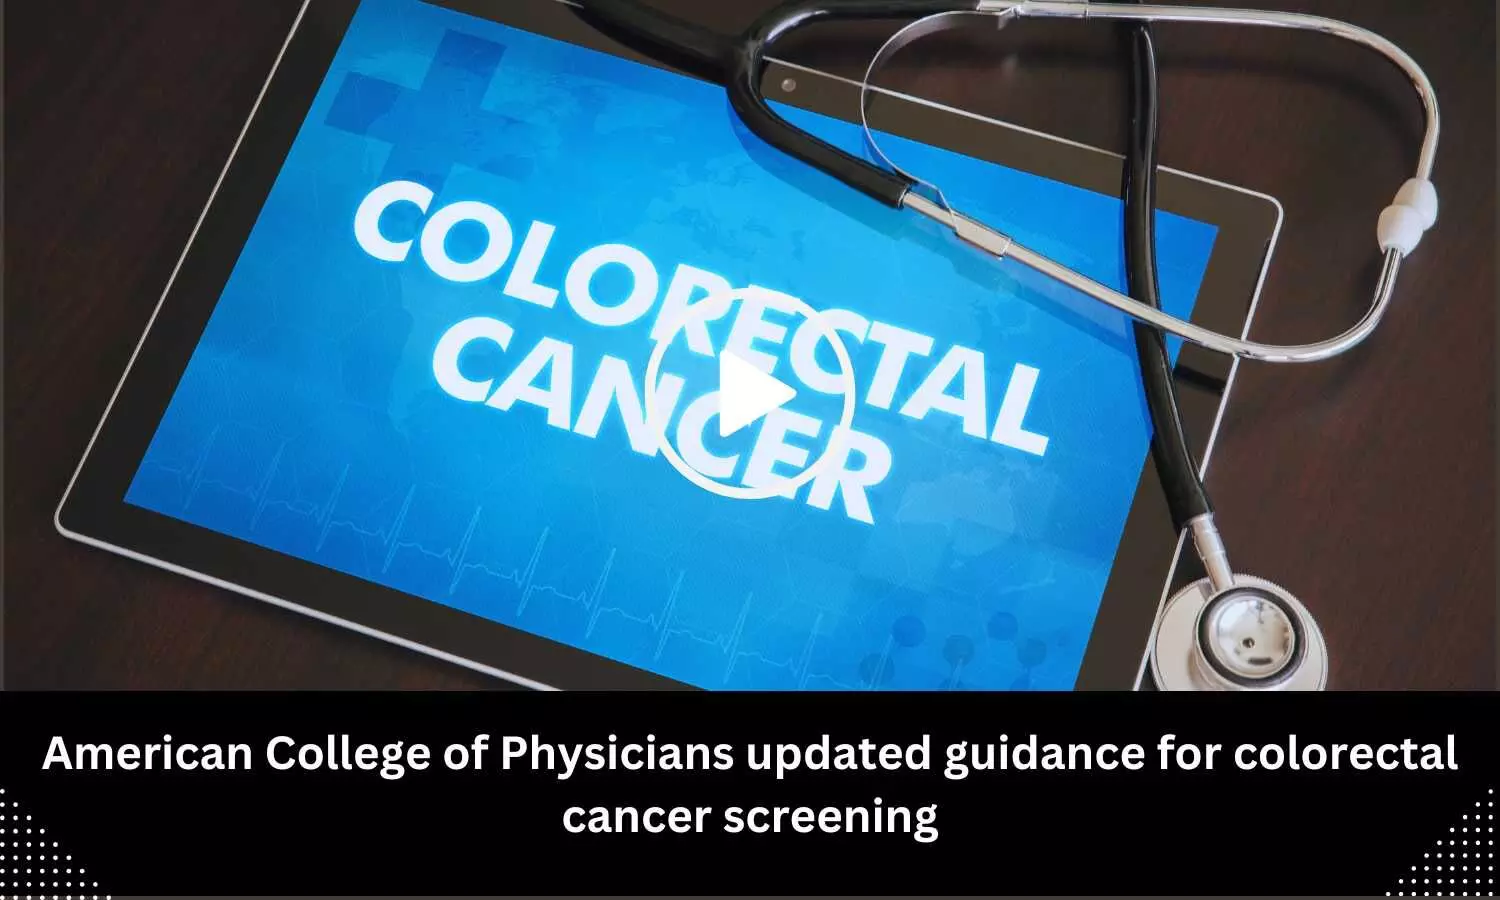 American College of Physicians updated guidance for colorectal cancer screening